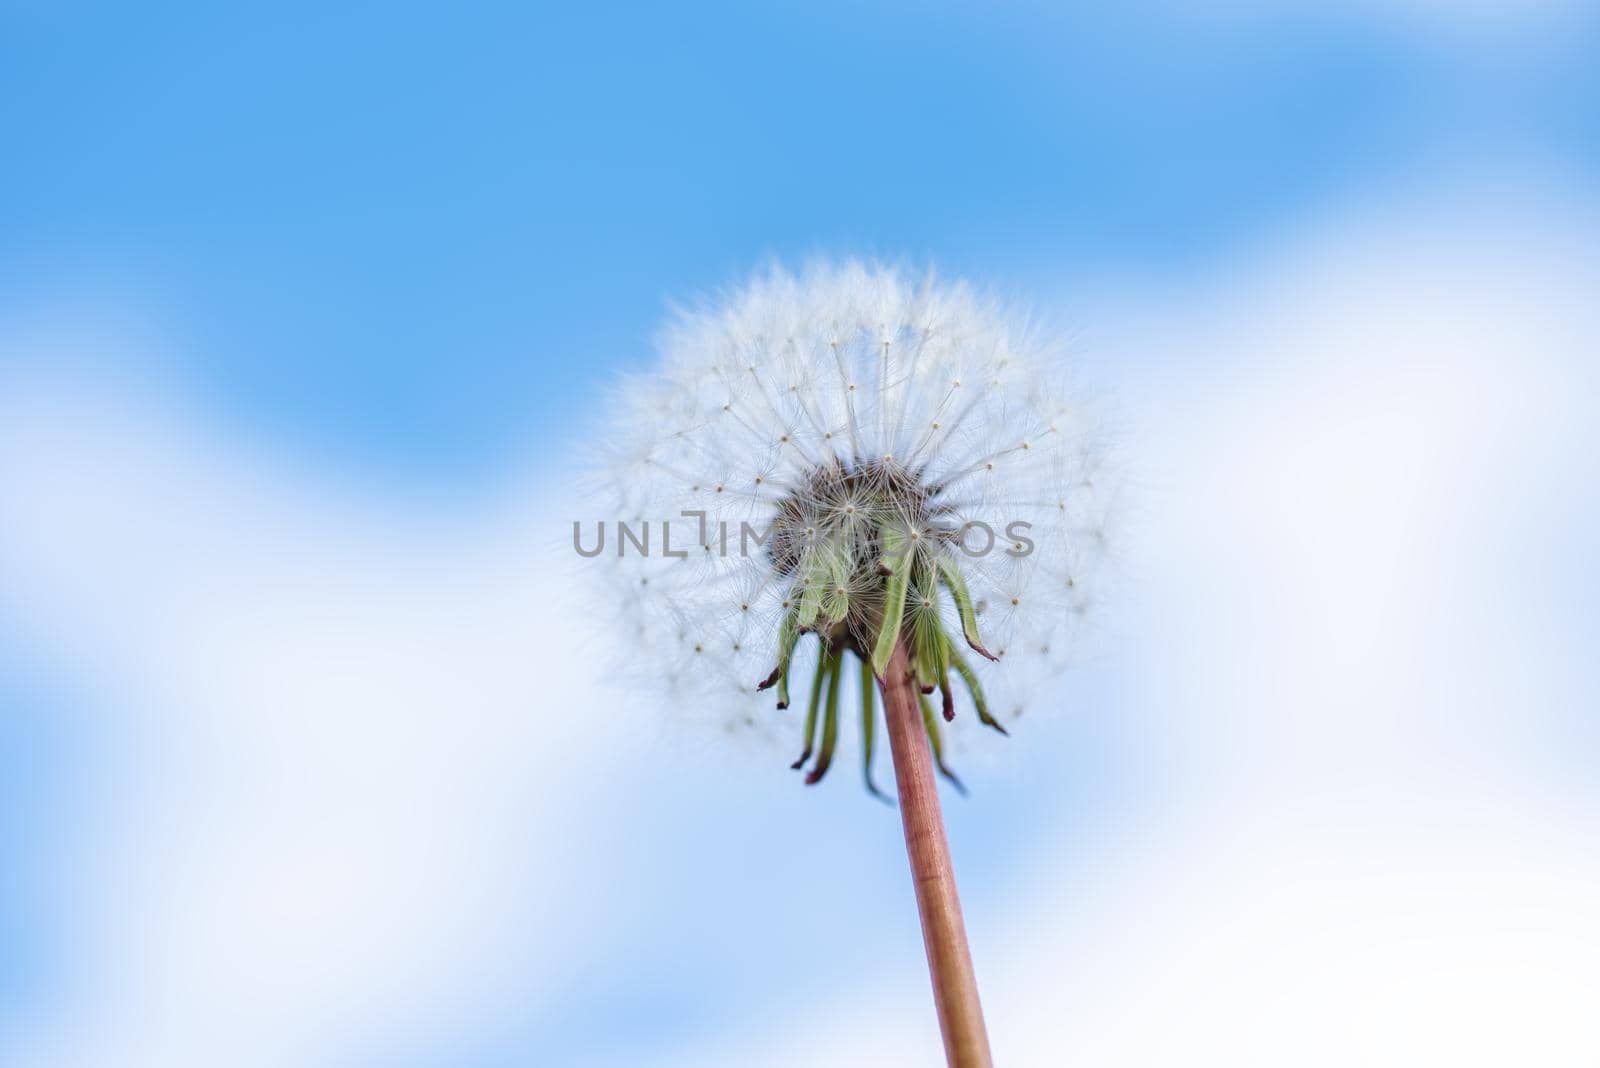 Dandelion with seeds blowing away in the wind across a clear blue sky by Estival